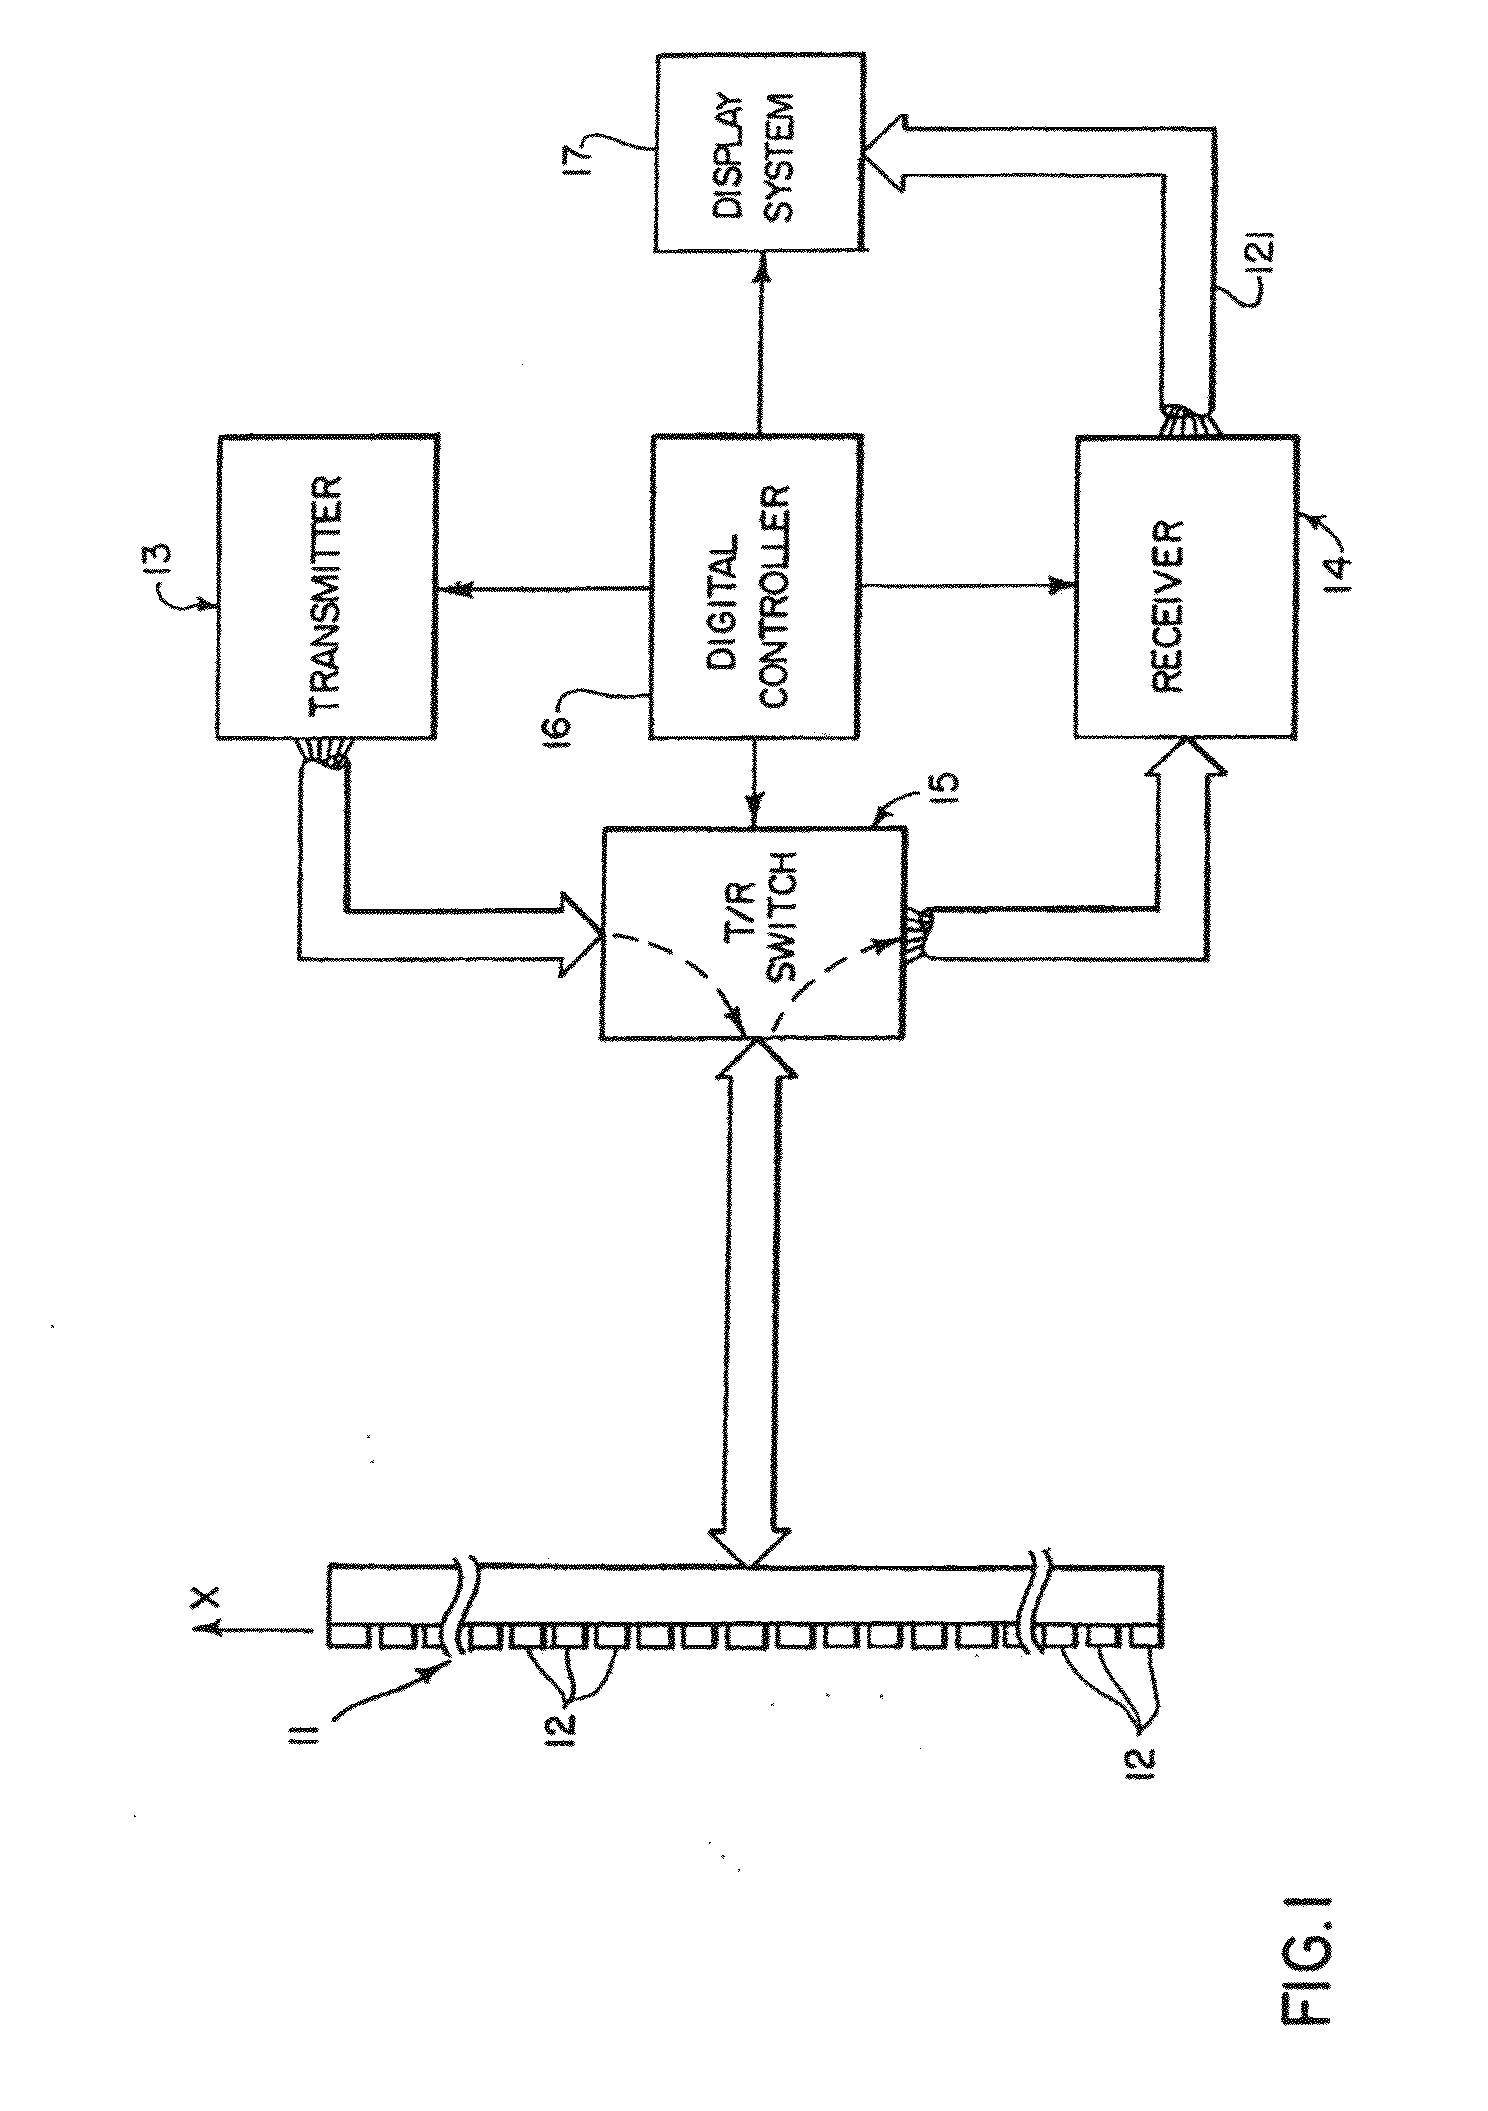 Method for determining flow and flow volume through a vessel